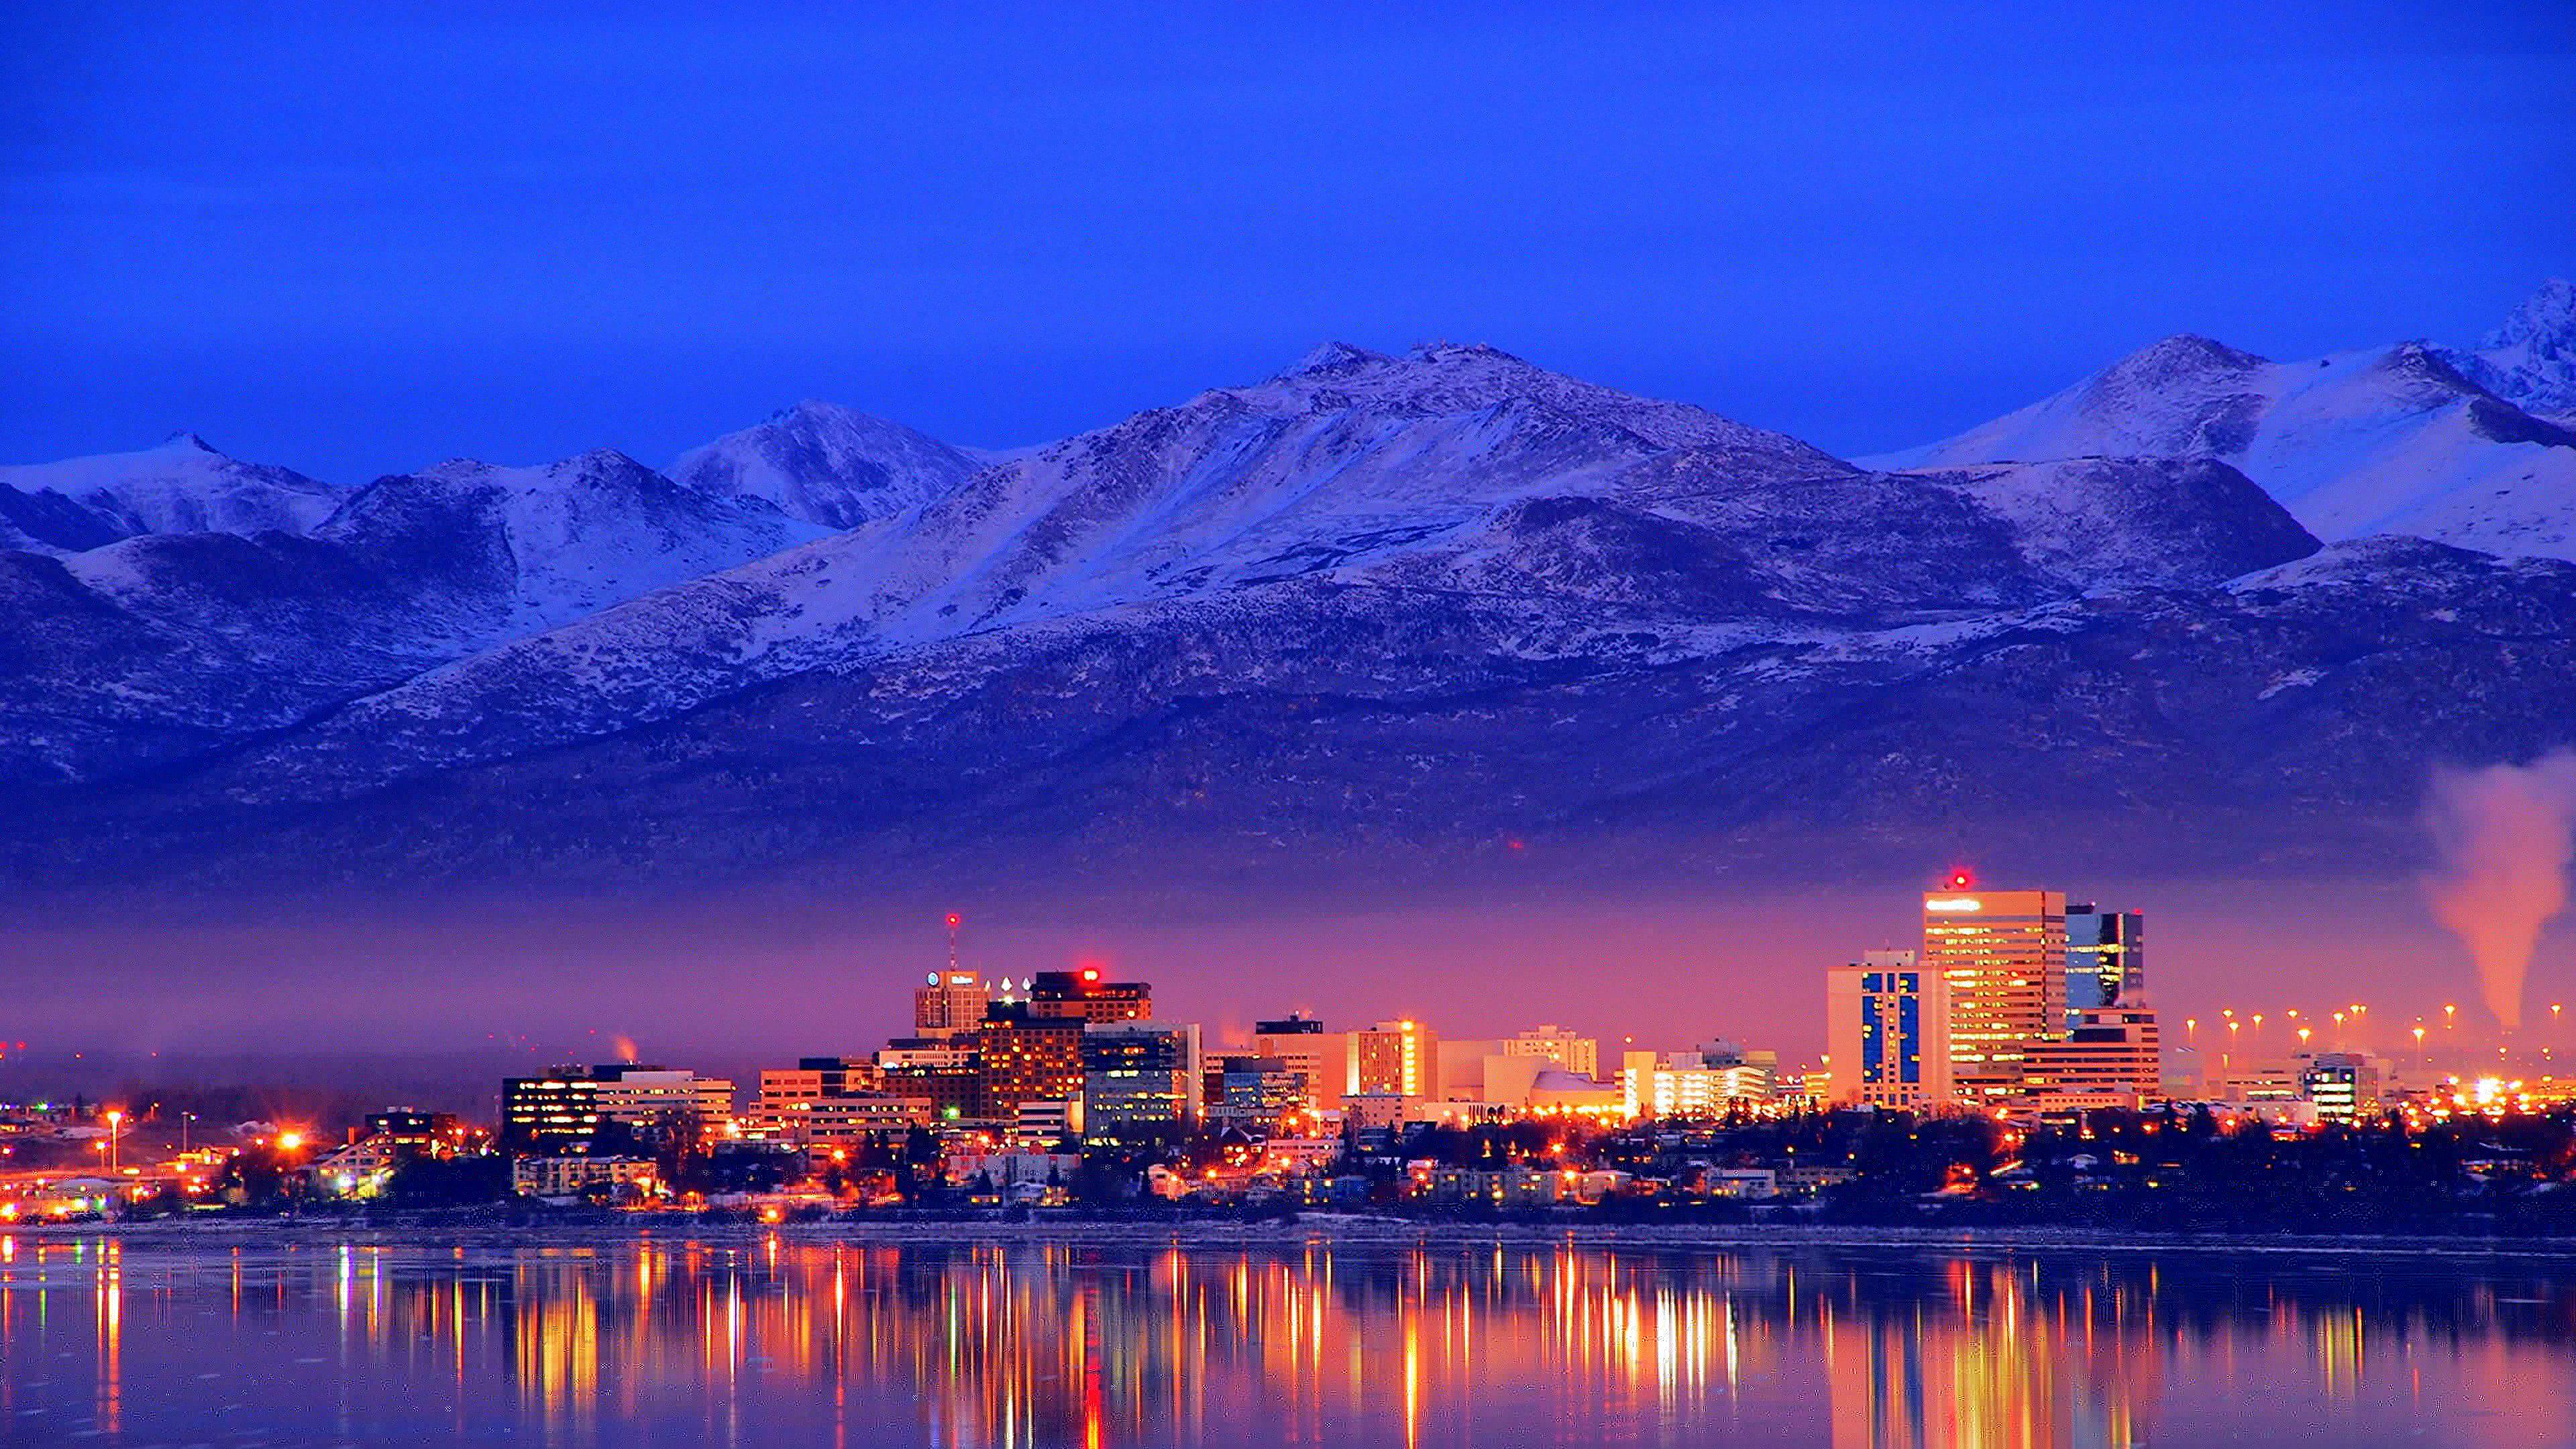 Anchorage 4K wallpaper for your desktop or mobile screen free and easy to download